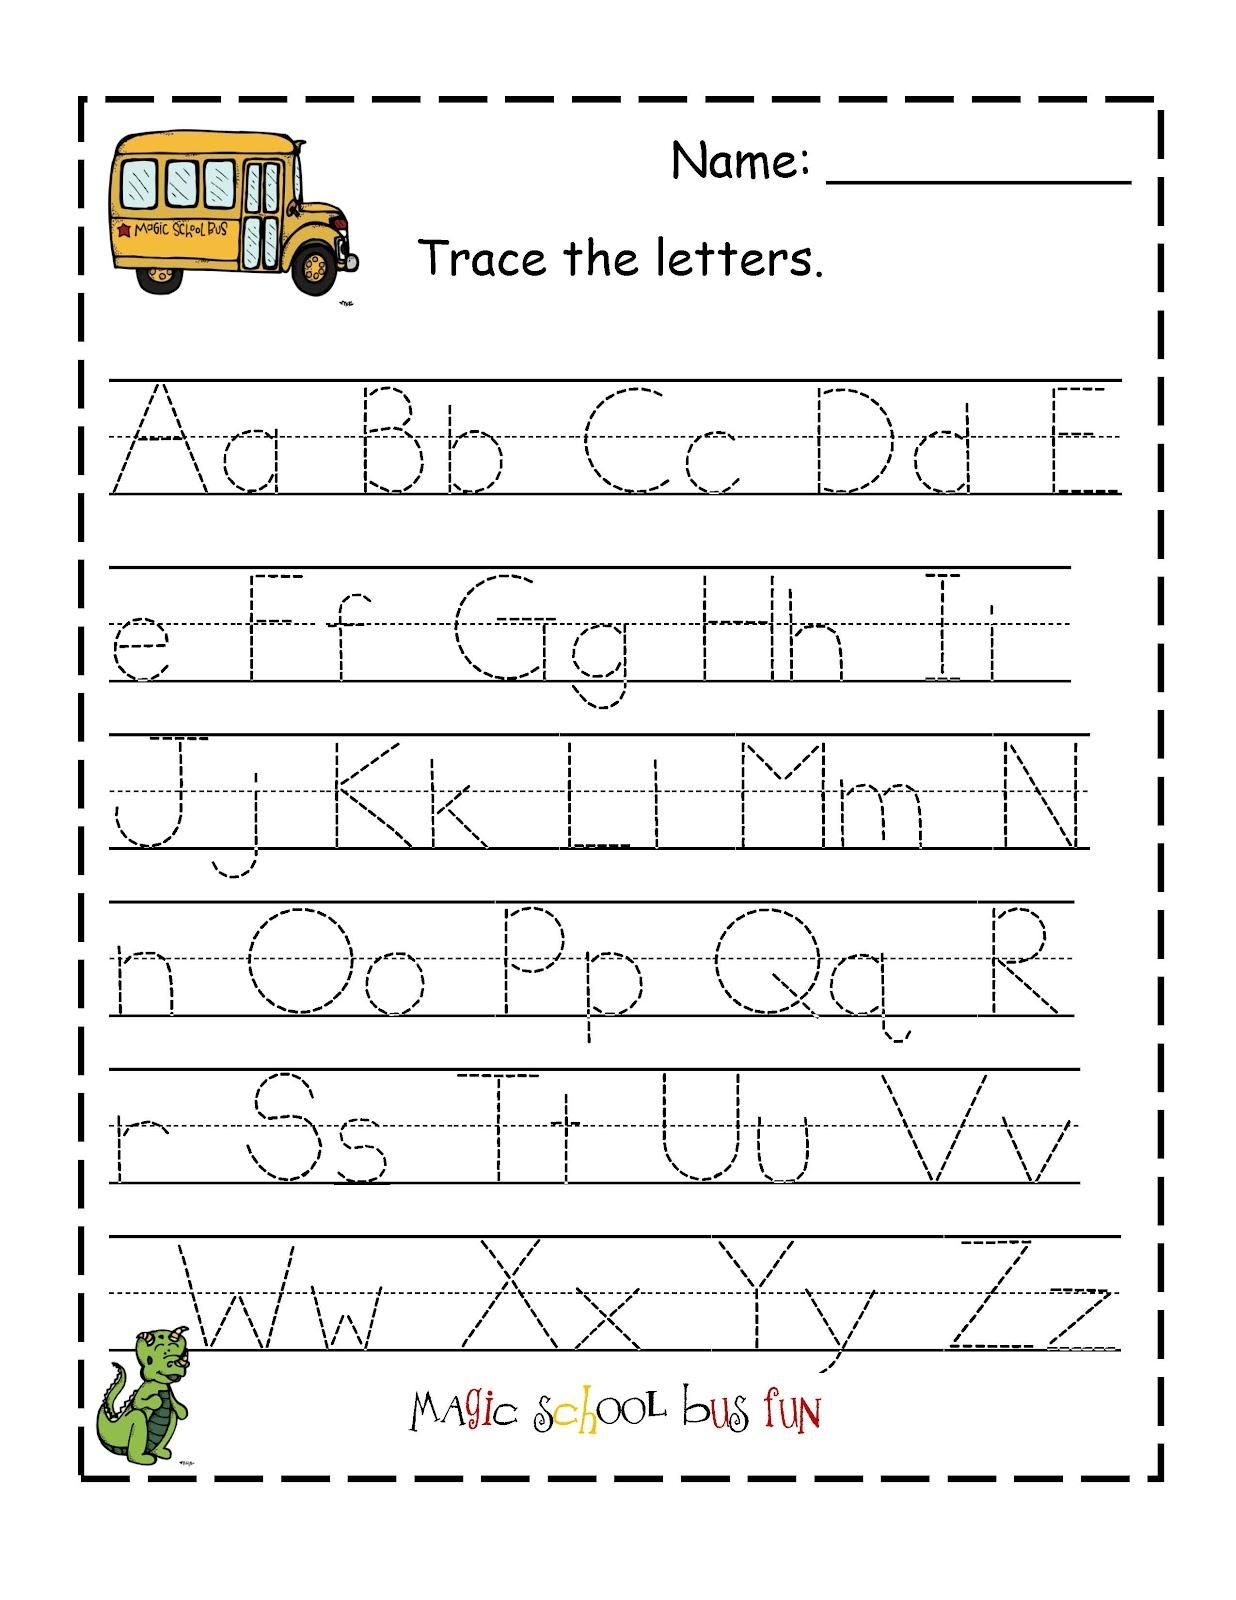 Free Printable Abc Tracing Worksheets #2 | Places To Visit | Free Printable Alphabet Tracing Worksheets